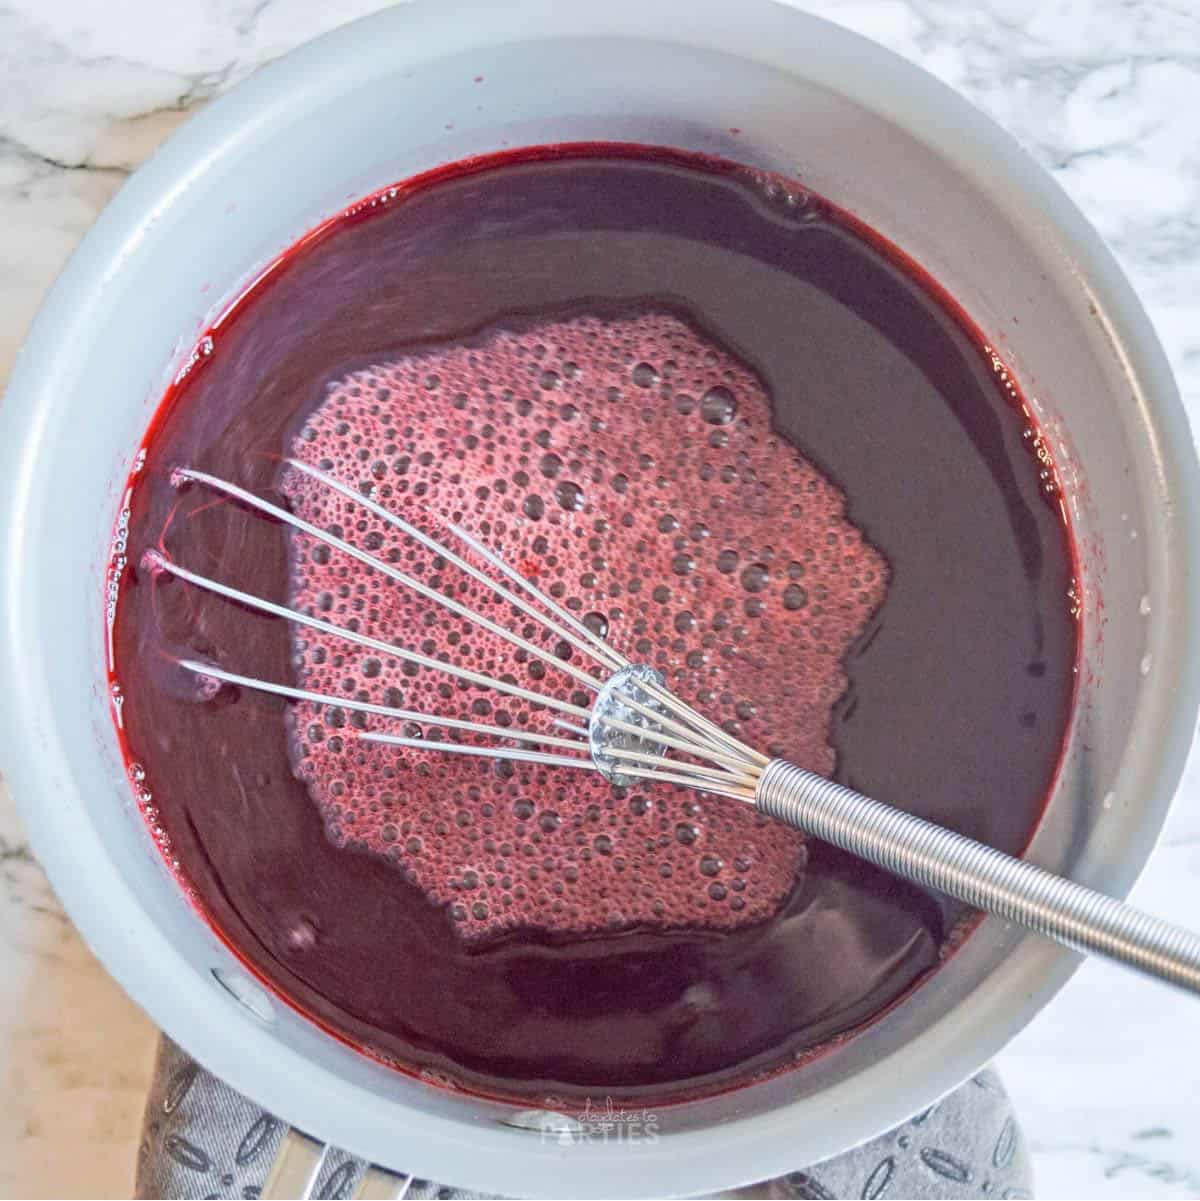 Cherry gelatin mixture in a bowl with a whisk.